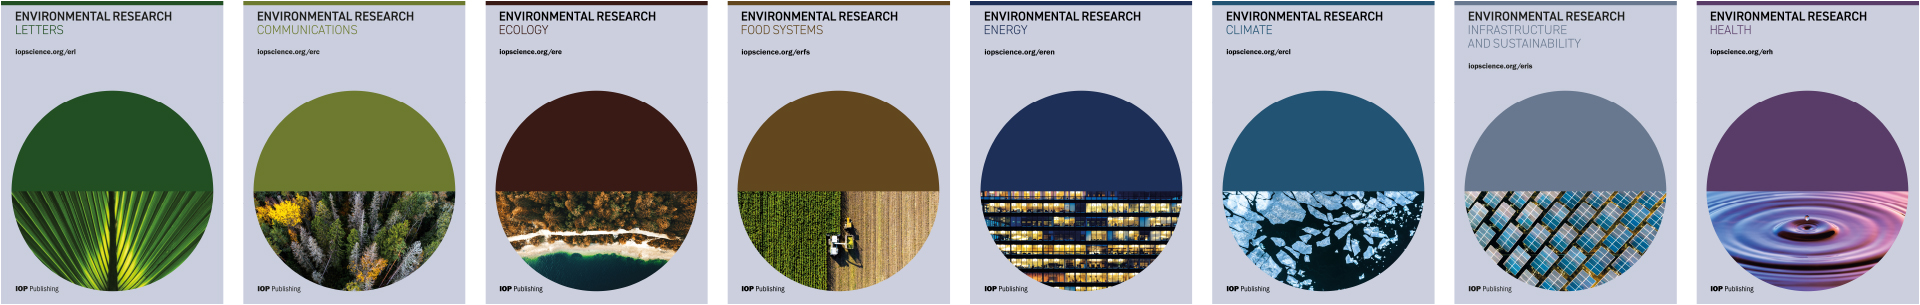 IOP Publishing's expanding Environmental Research journal series